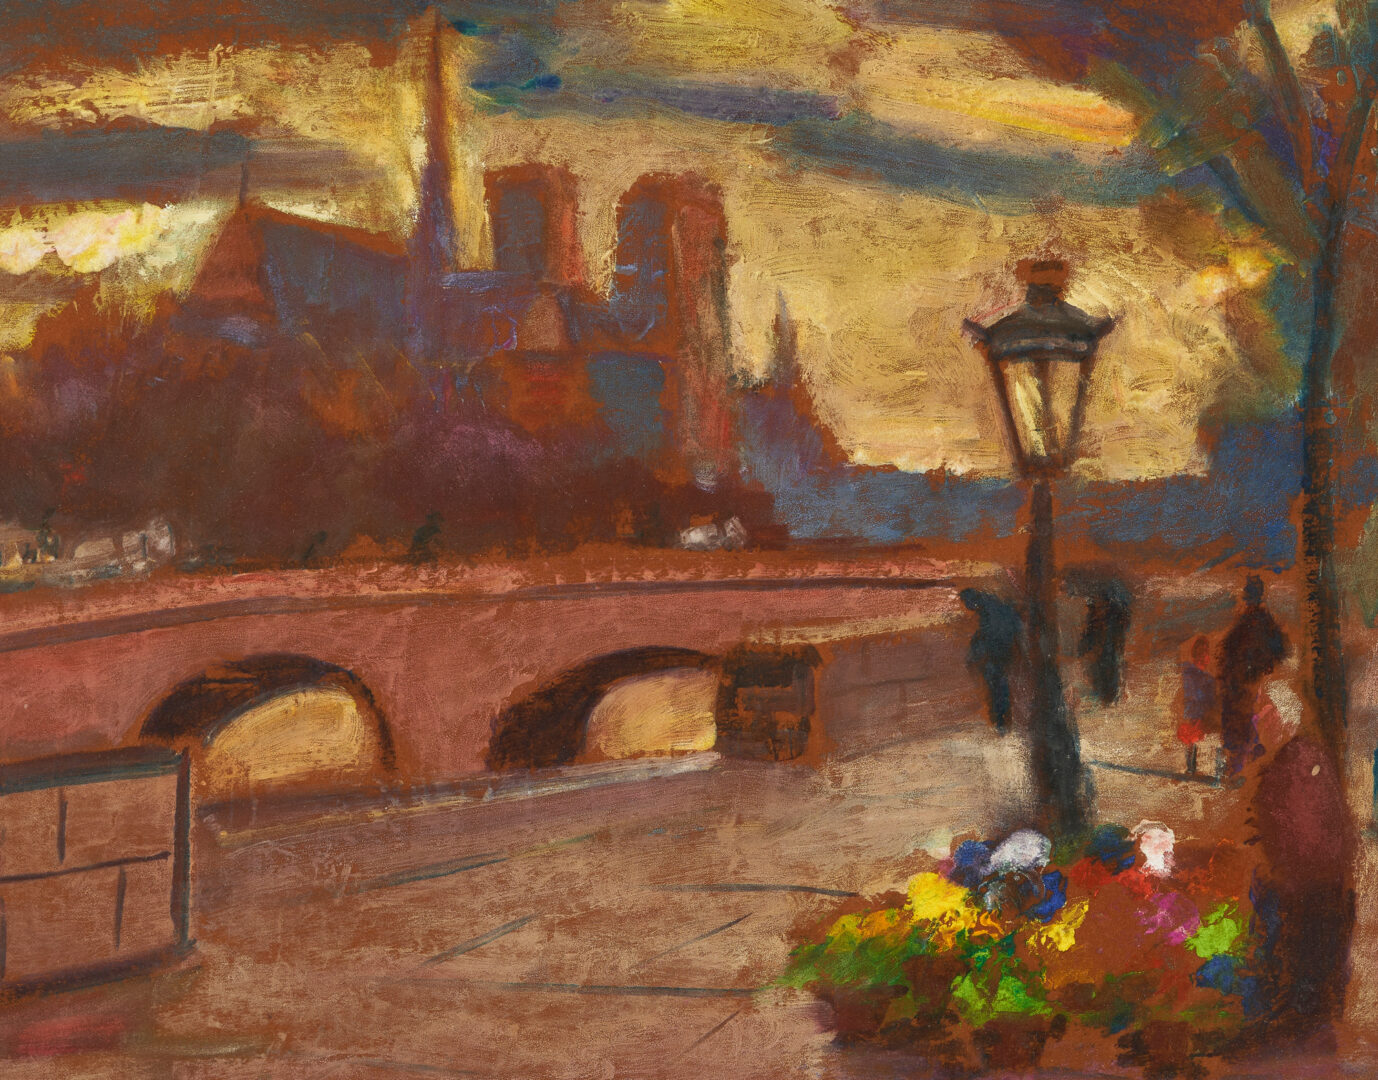 Lot 1038: Israel Abramofsky Mixed Media Streetscape Painting, Flower Sellers at Night